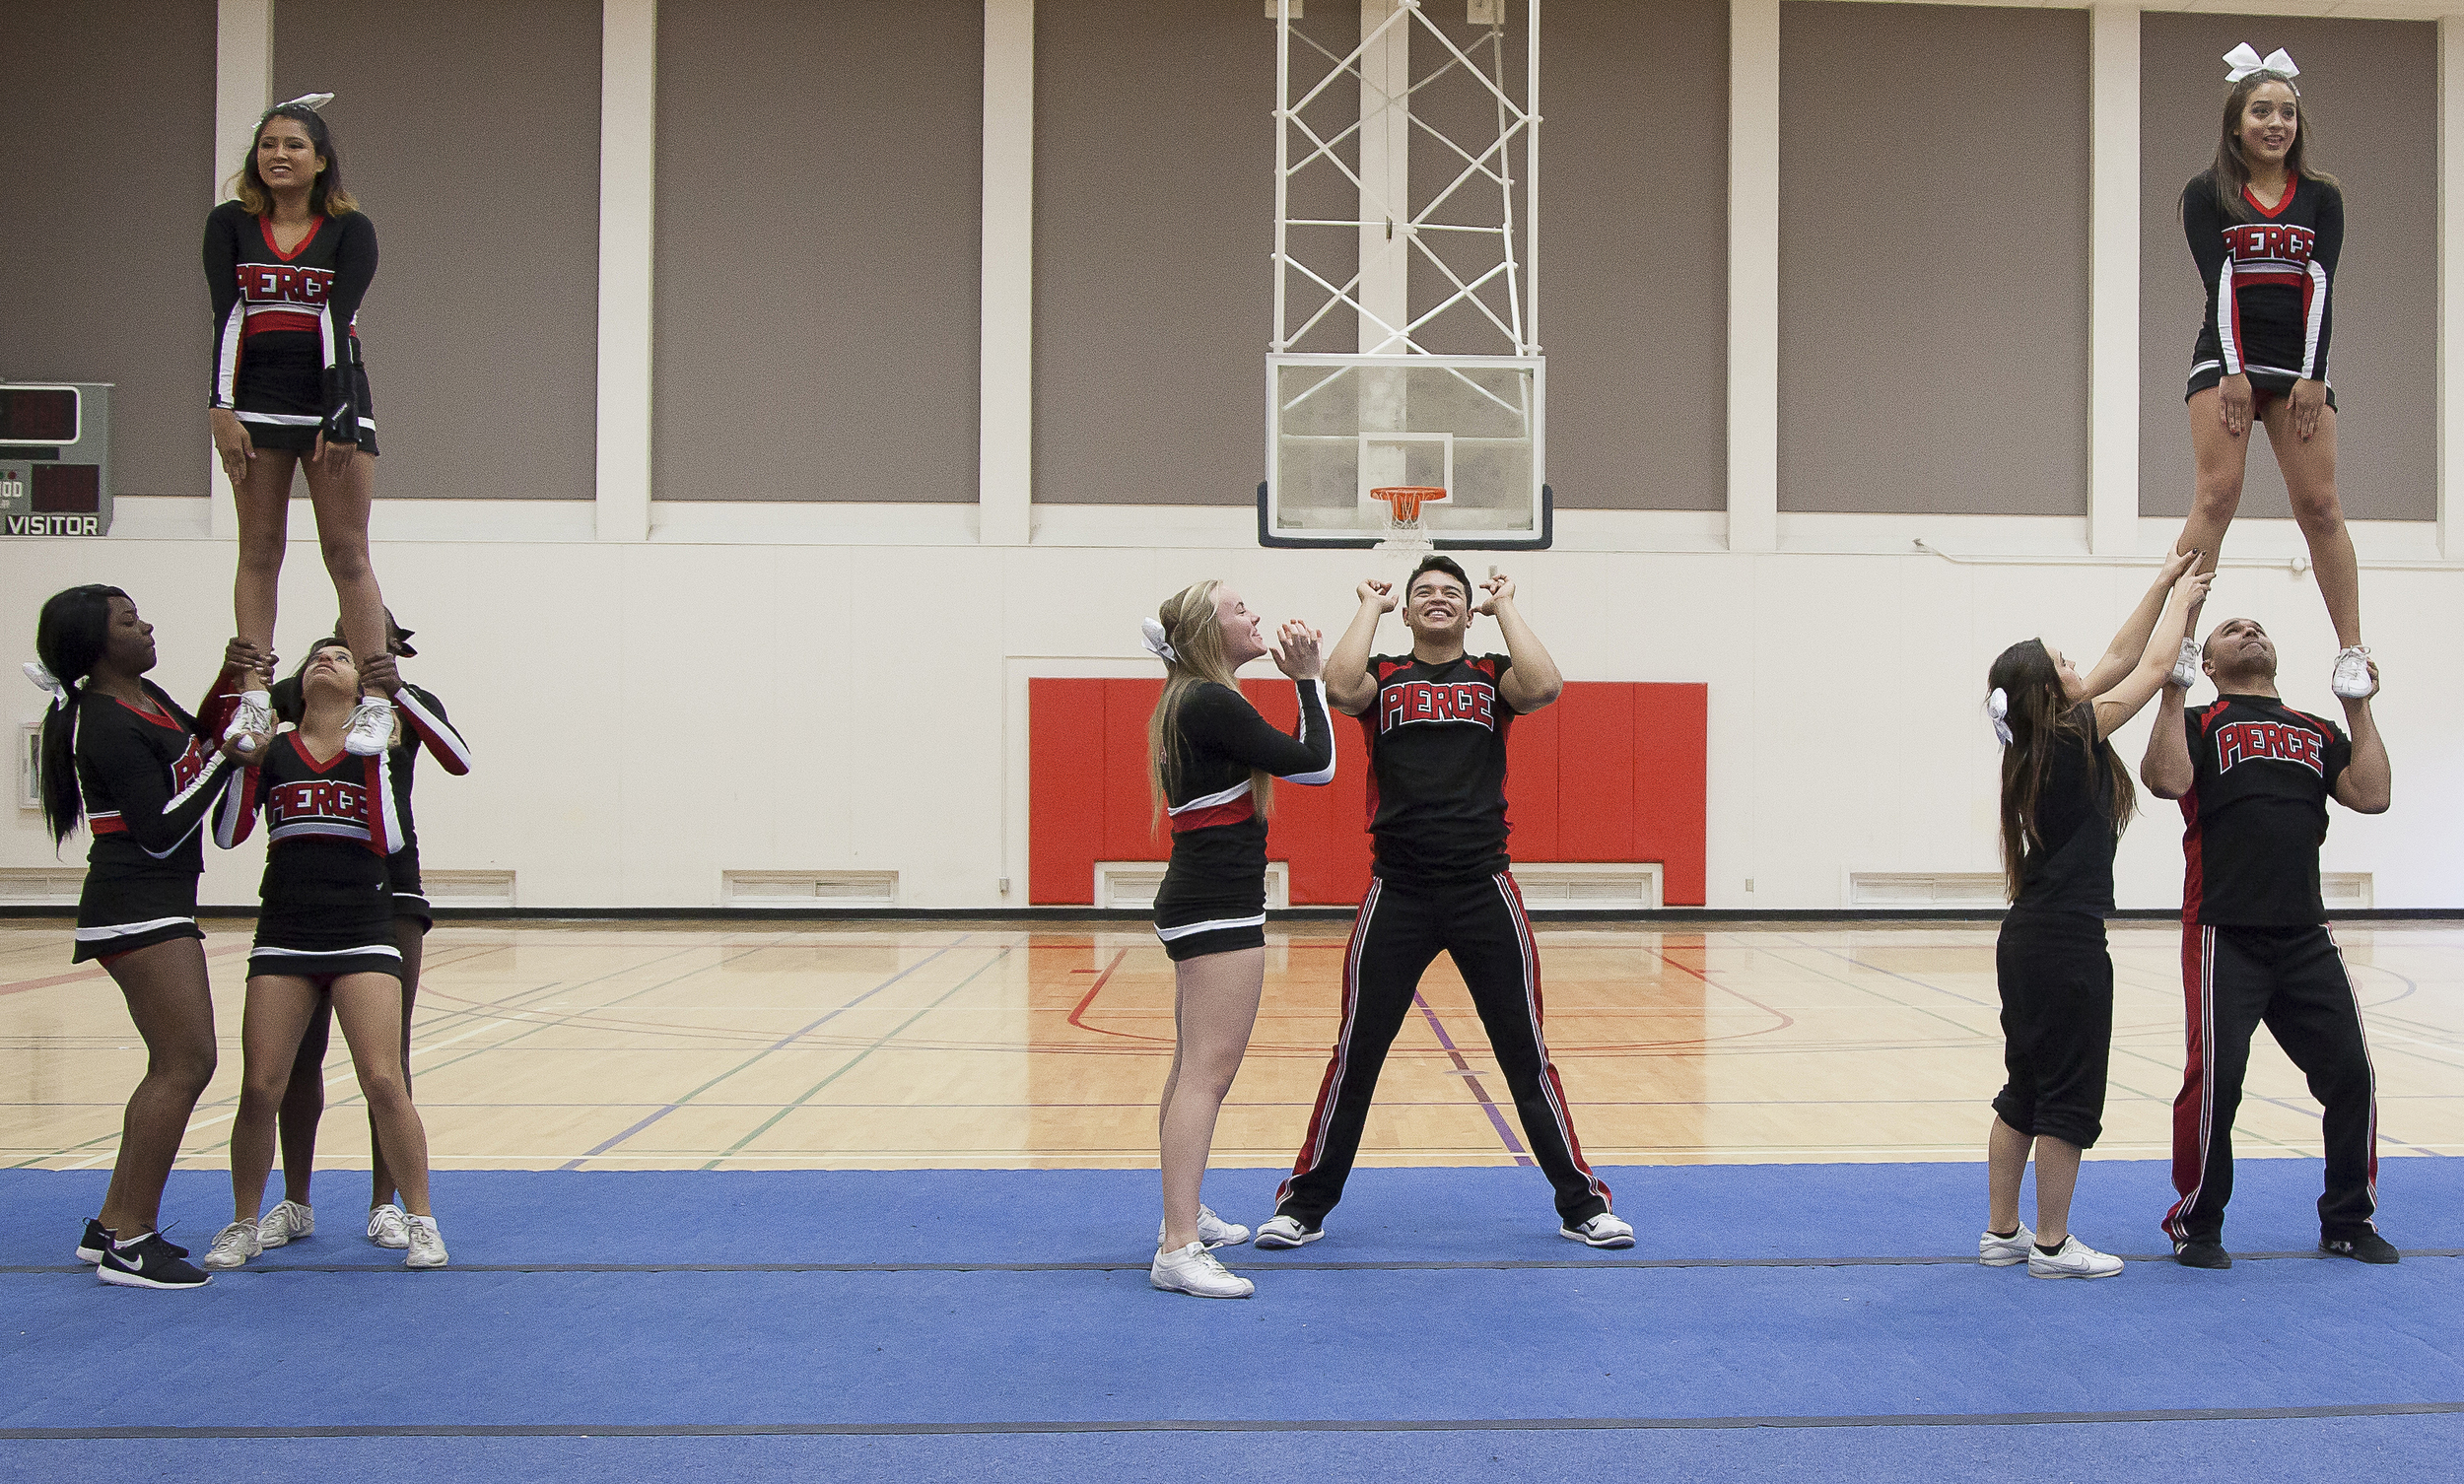  The Pierce Cheer Competition team perform their routine during a practice session inside the North Gym of Pierce College on Sunday March 1, 2015. Woodland Hills, Calif.  Read the full story&nbsp; here  